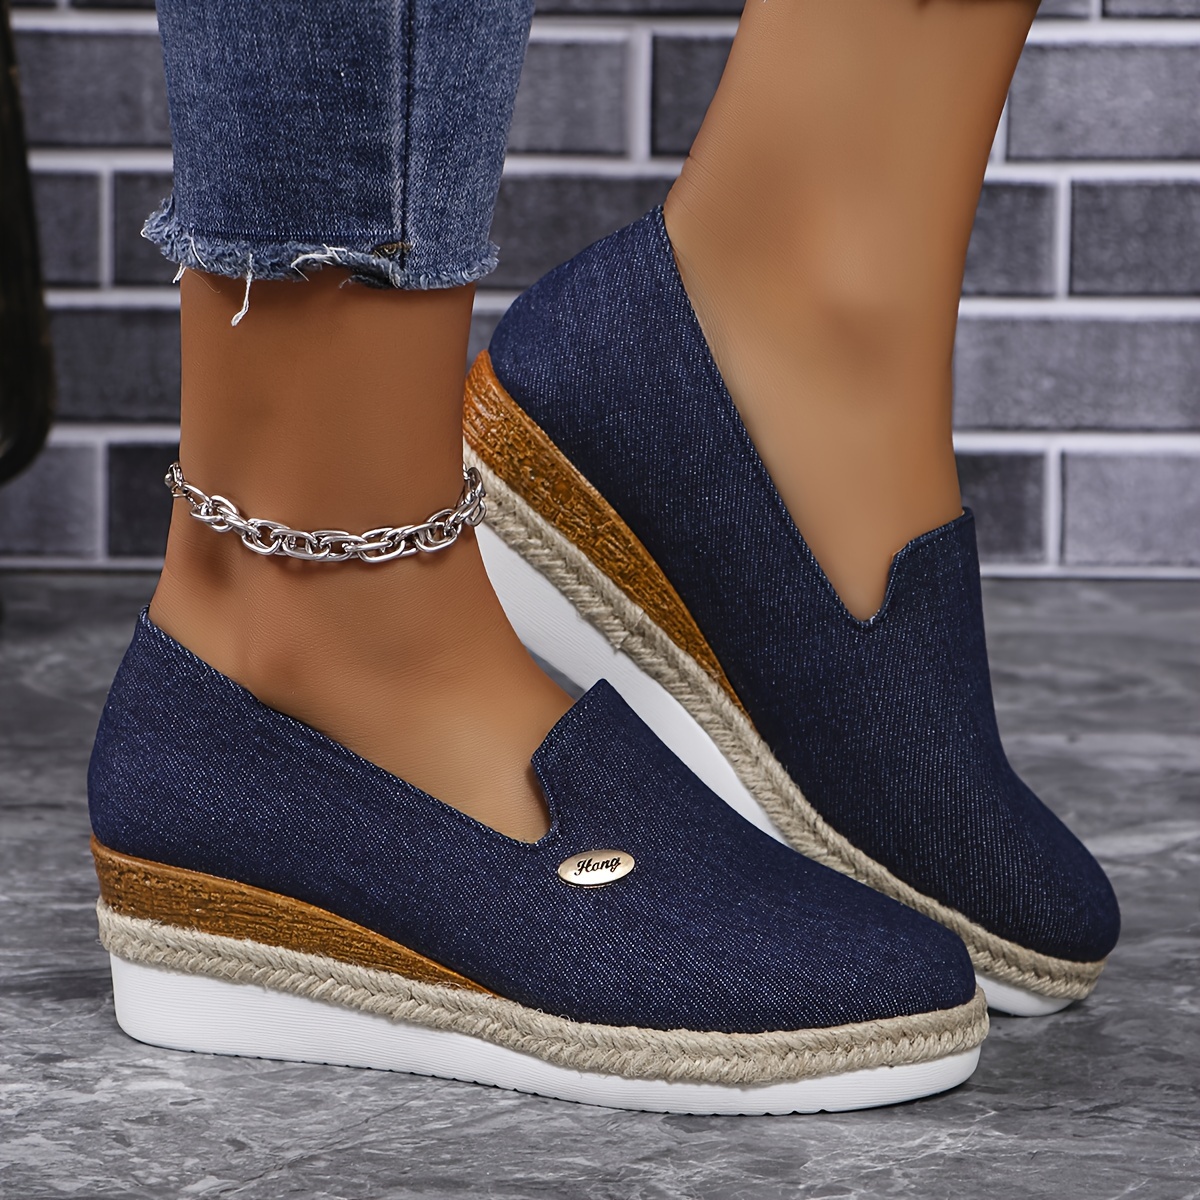 

Women's Fashion Wedge Heeled Shoes, Thick Sole, Indoor & Outdoor, Denim Slip-on Shoes With Espadrille Detail